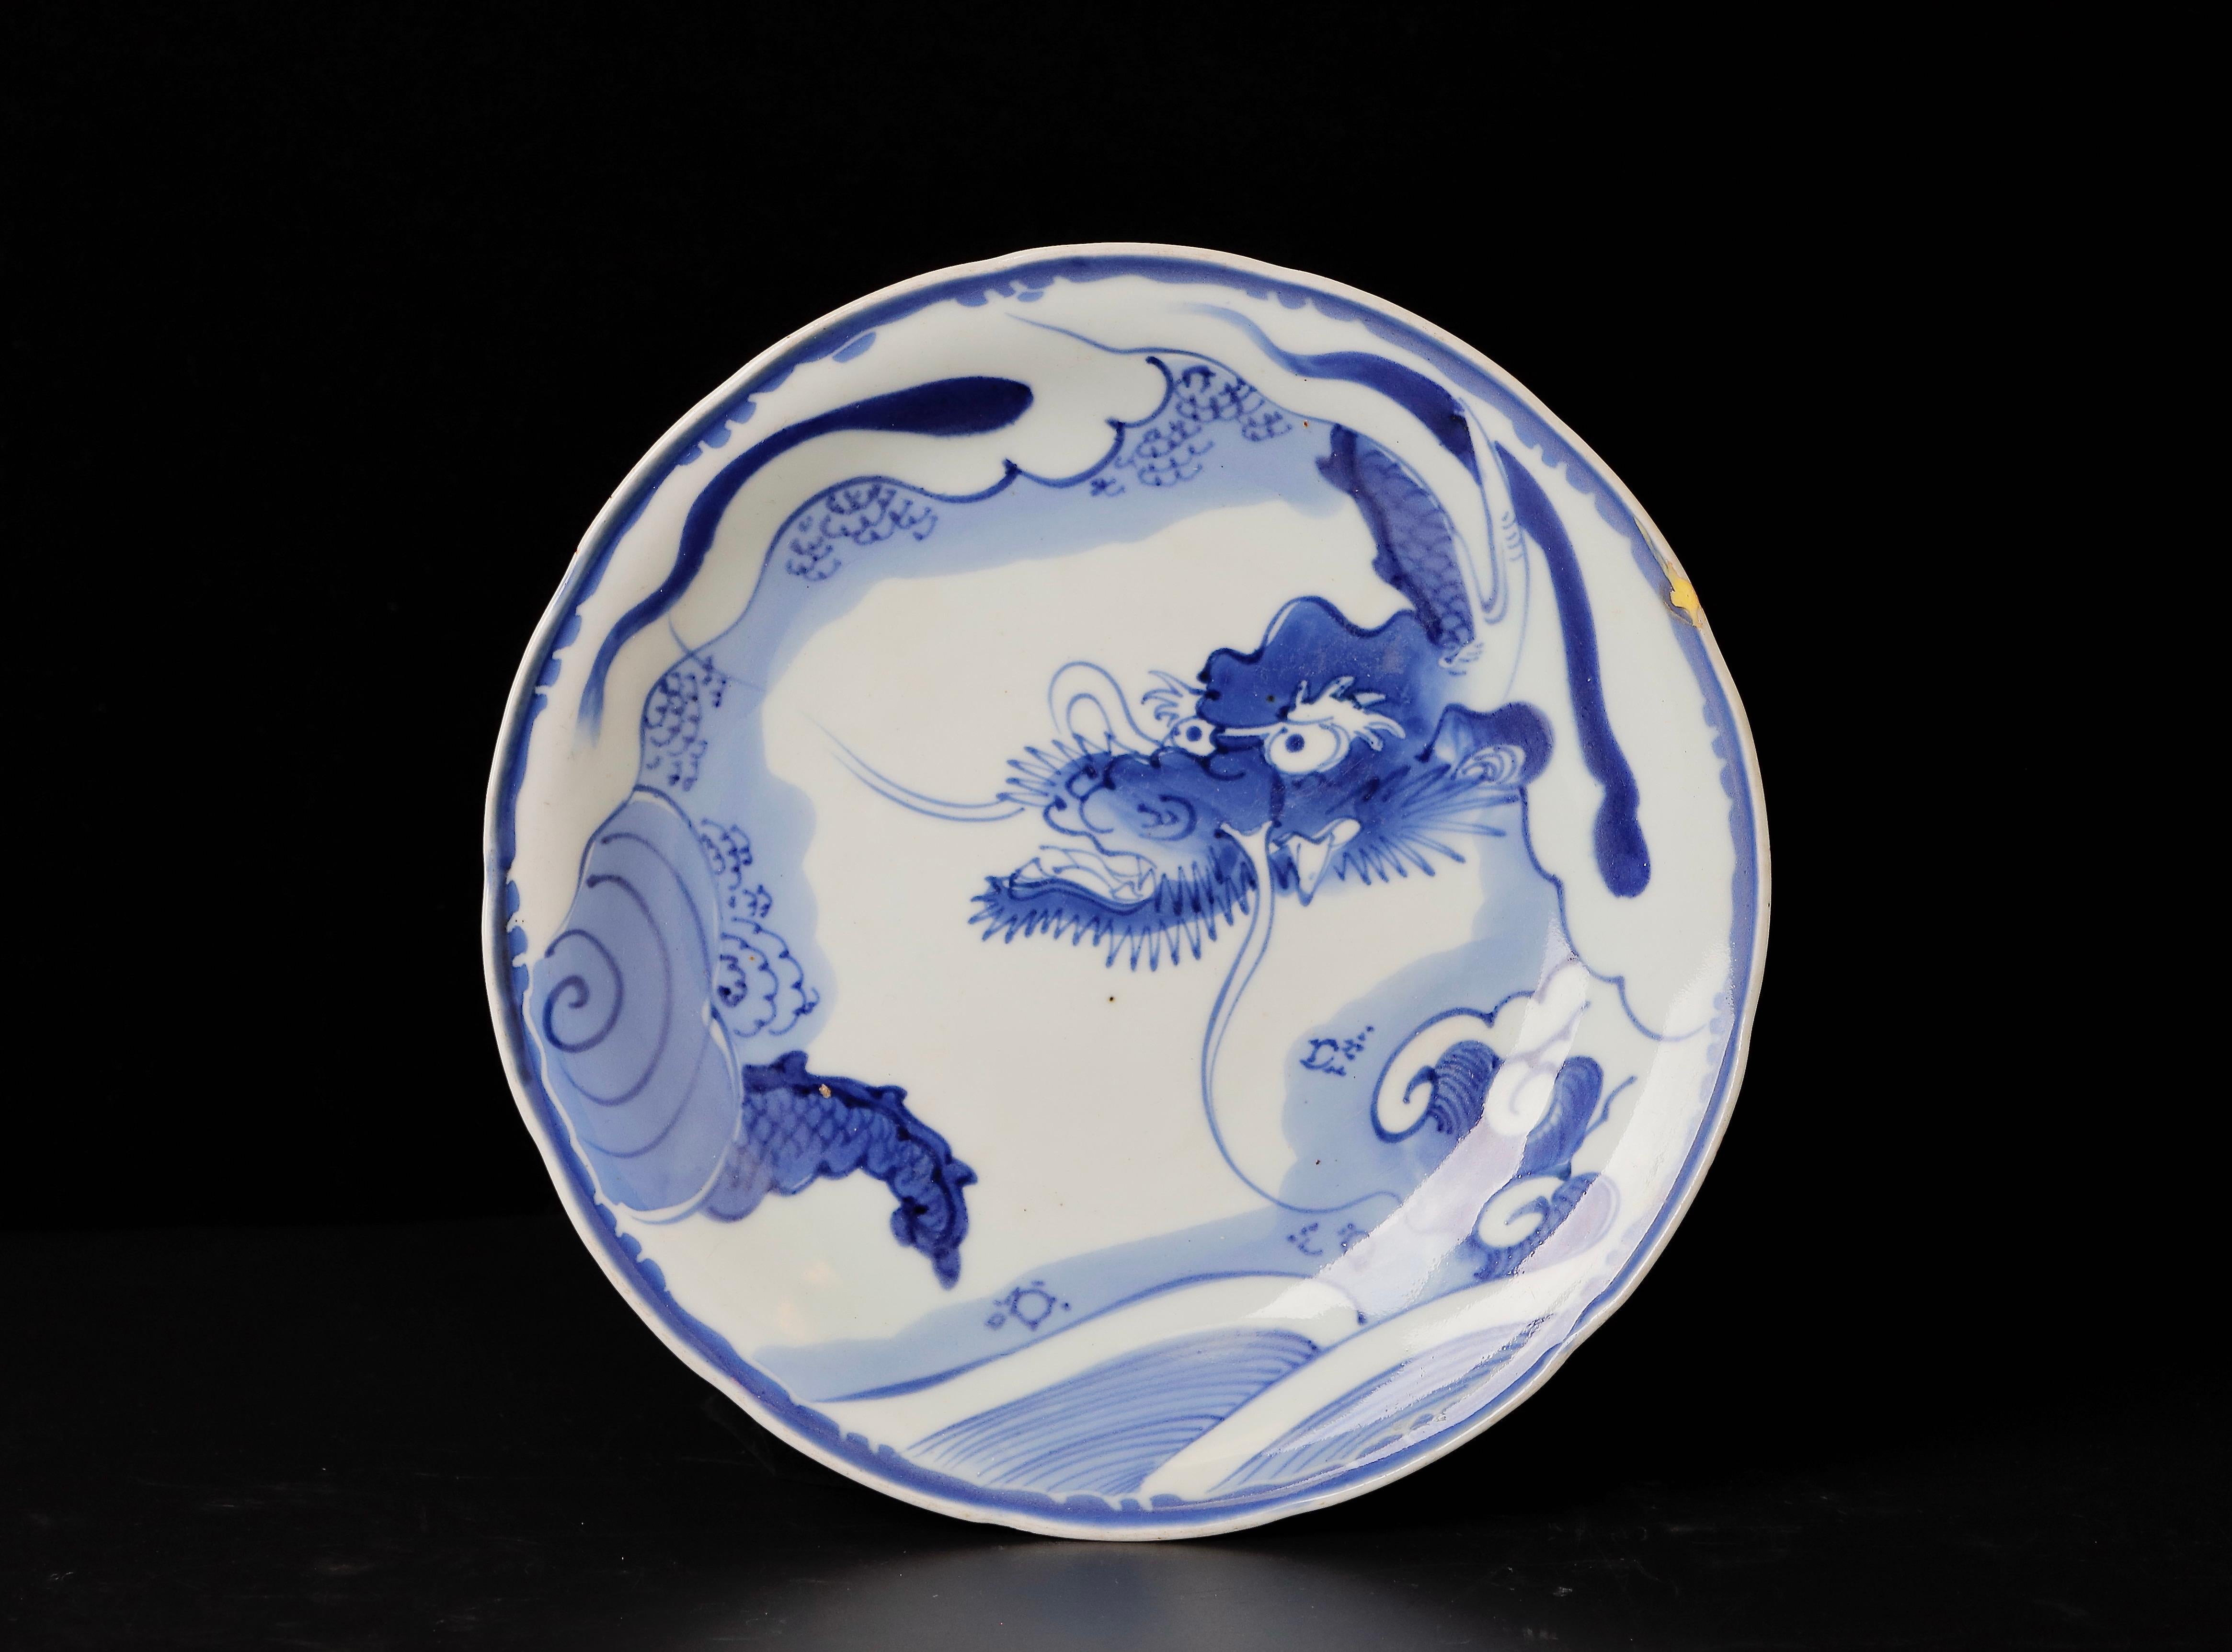 Superb Early Imari Porcelain Plate with Dragon Motif

Experience the timeless beauty of this superb Imari porcelain plate adorned with a captivating dragon motif. This exquisite piece hails from the late Edo period, dating back to the 18th-19th